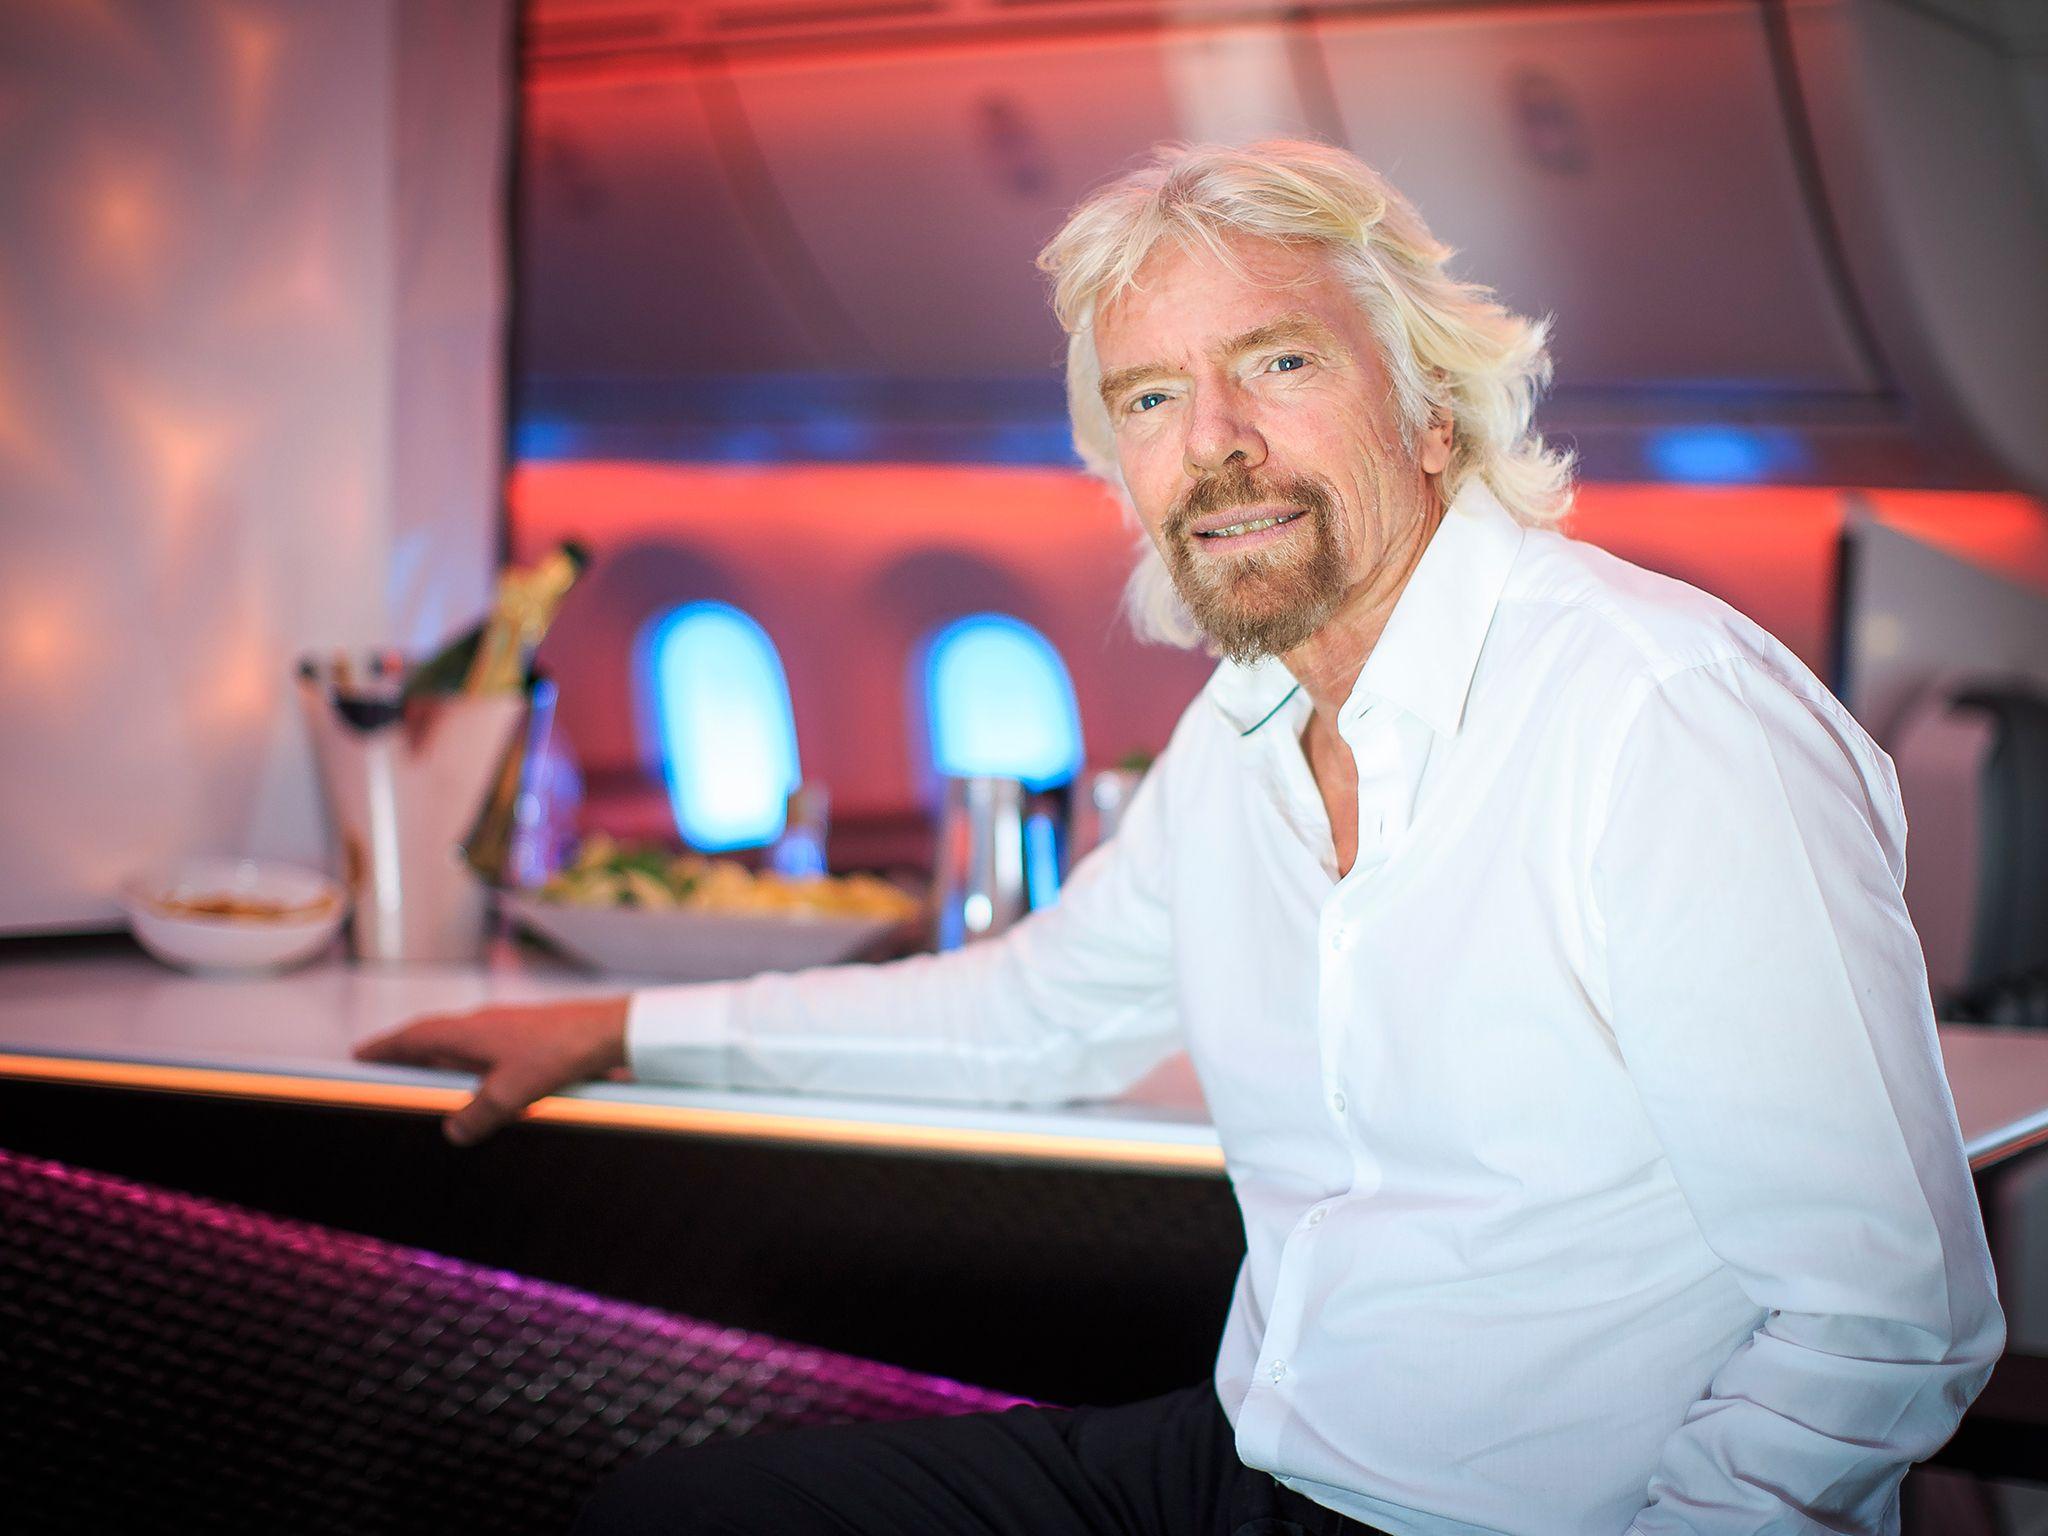 Richard Branson interview: Virgin chief on how age is moderating